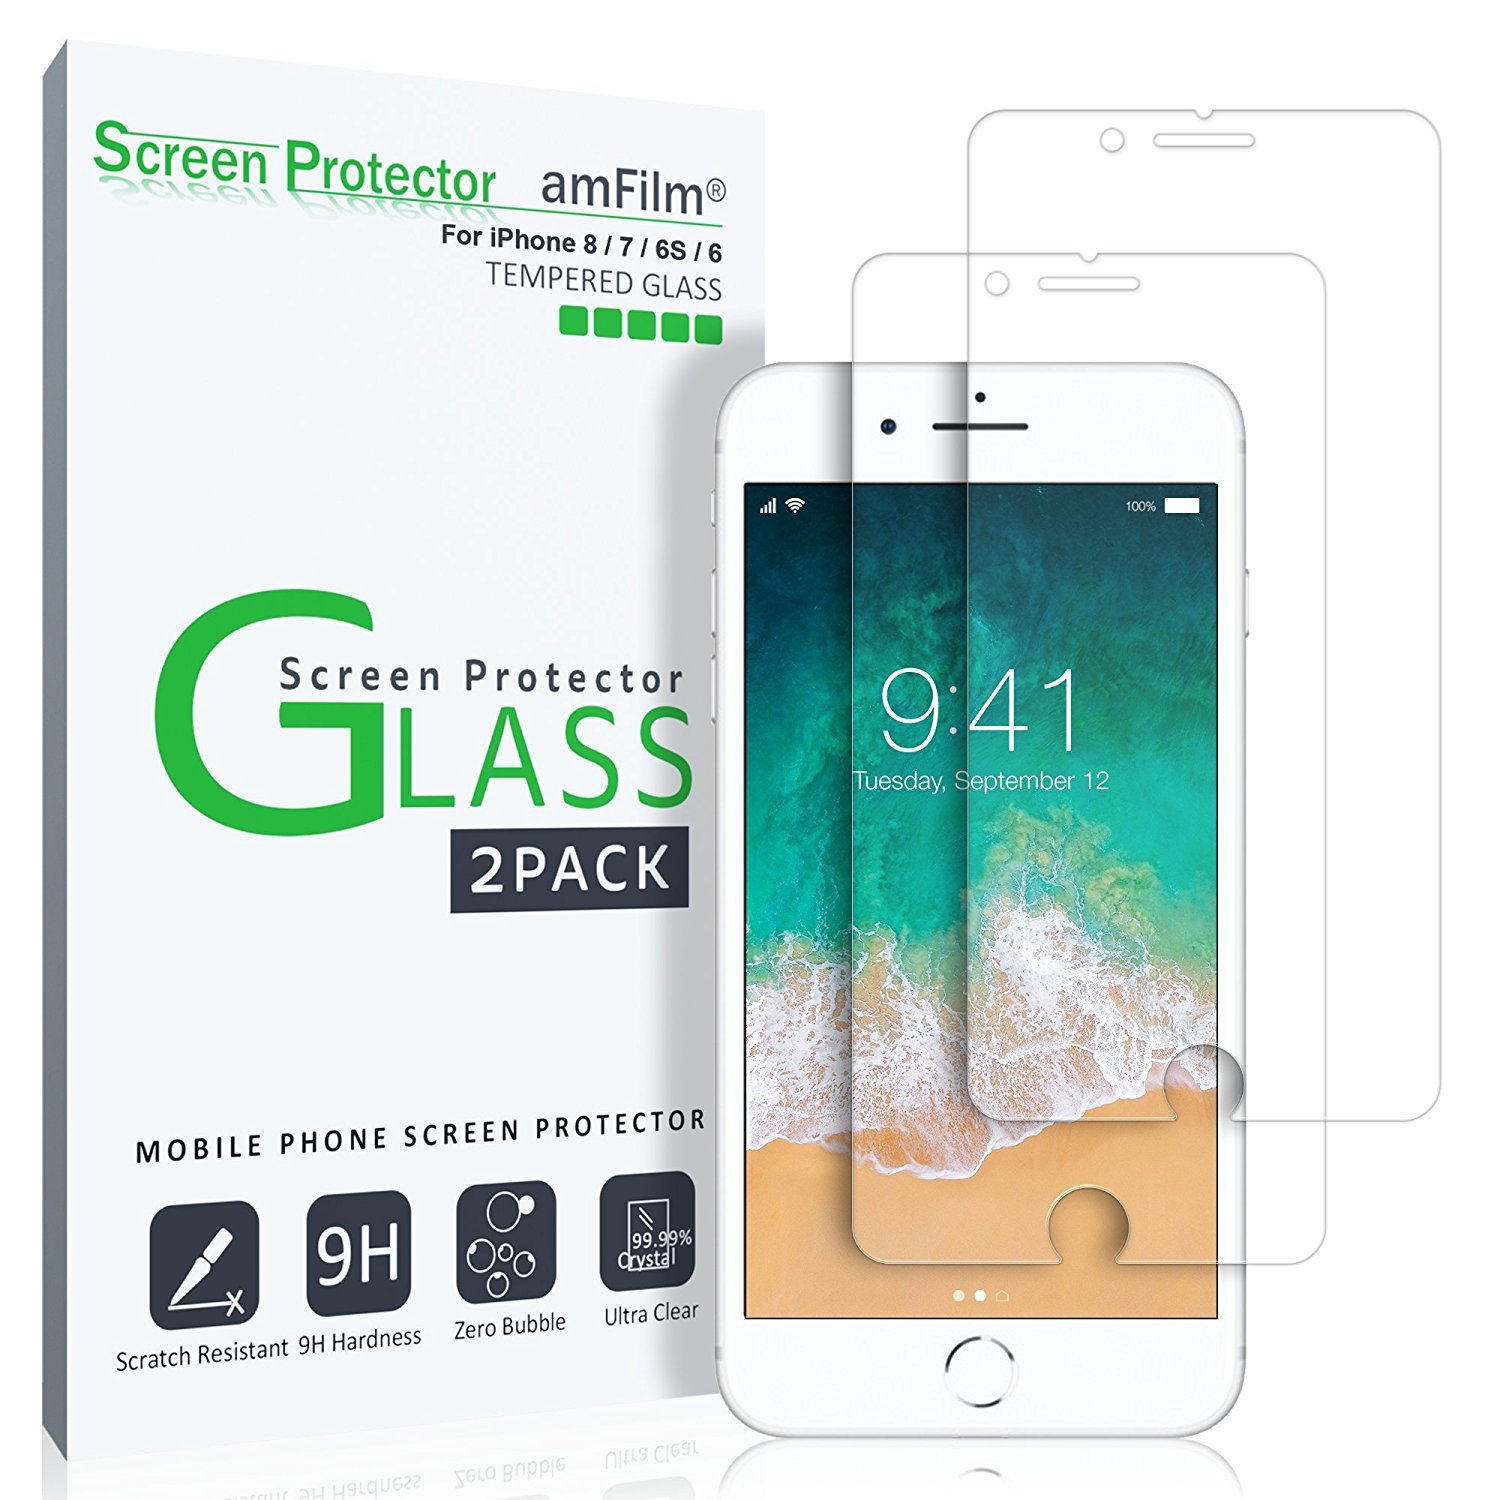 iphone 8 screen protector application try